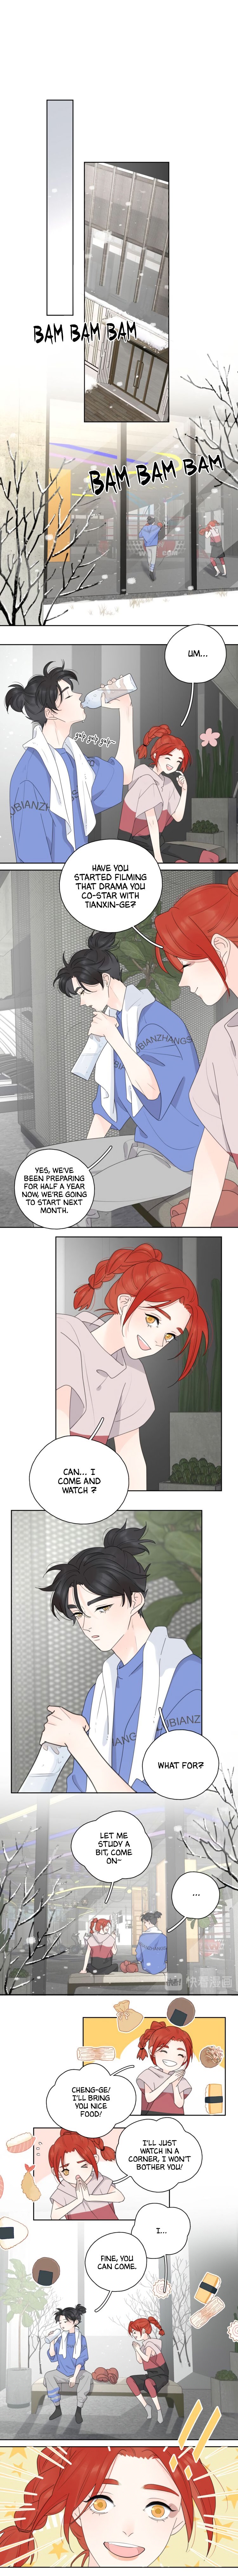 The Looks Of Love: The Heart Has Its Reasons - Page 3